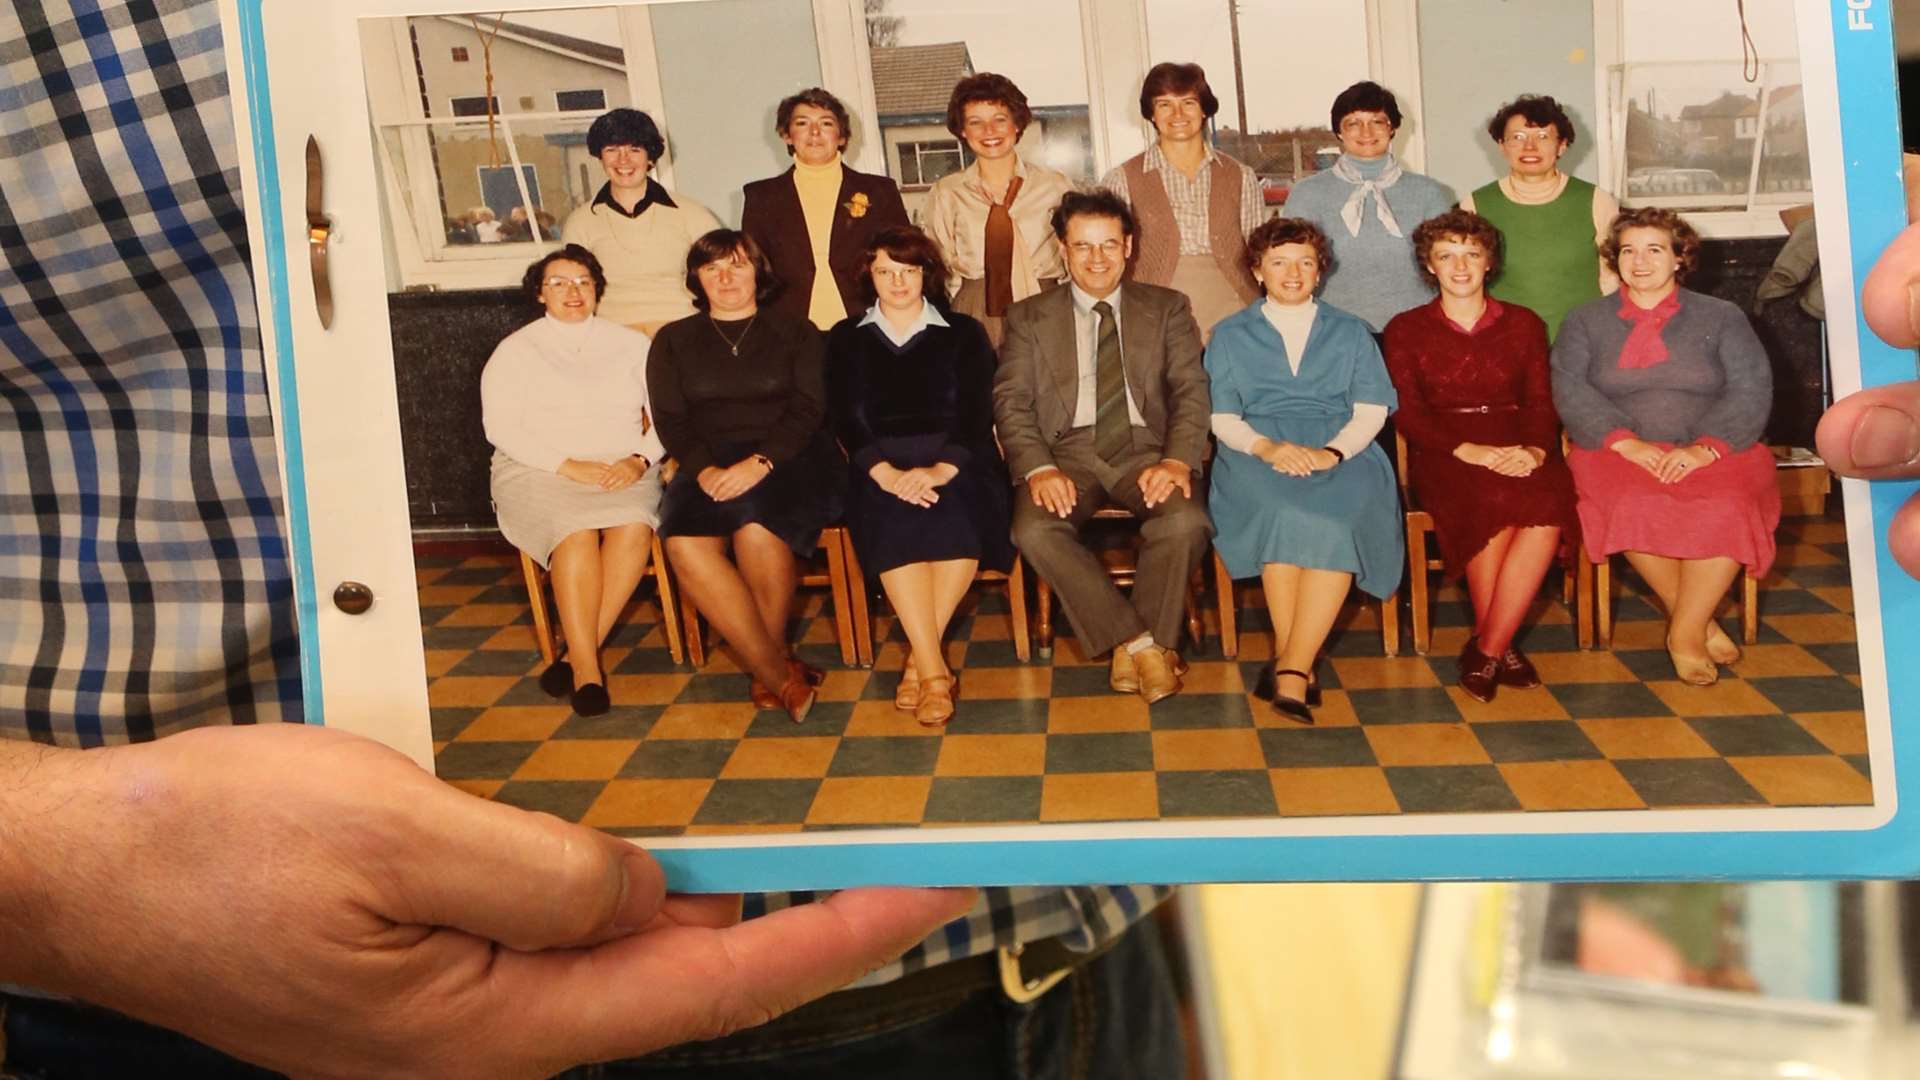 An old class photo from Halfway Houses